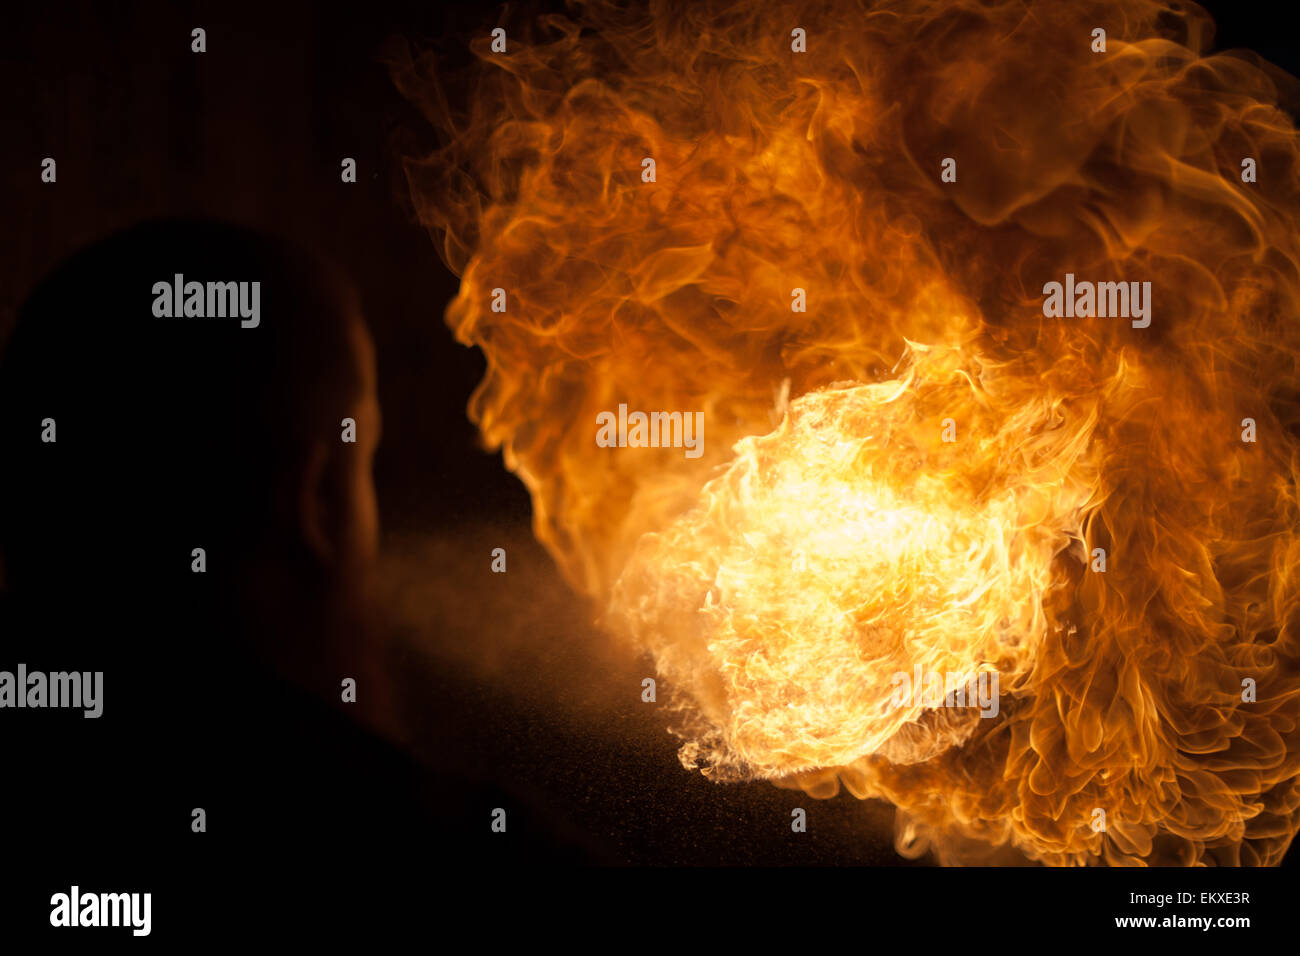 a fire breathe with a silhouetted performer figure Stock Photo